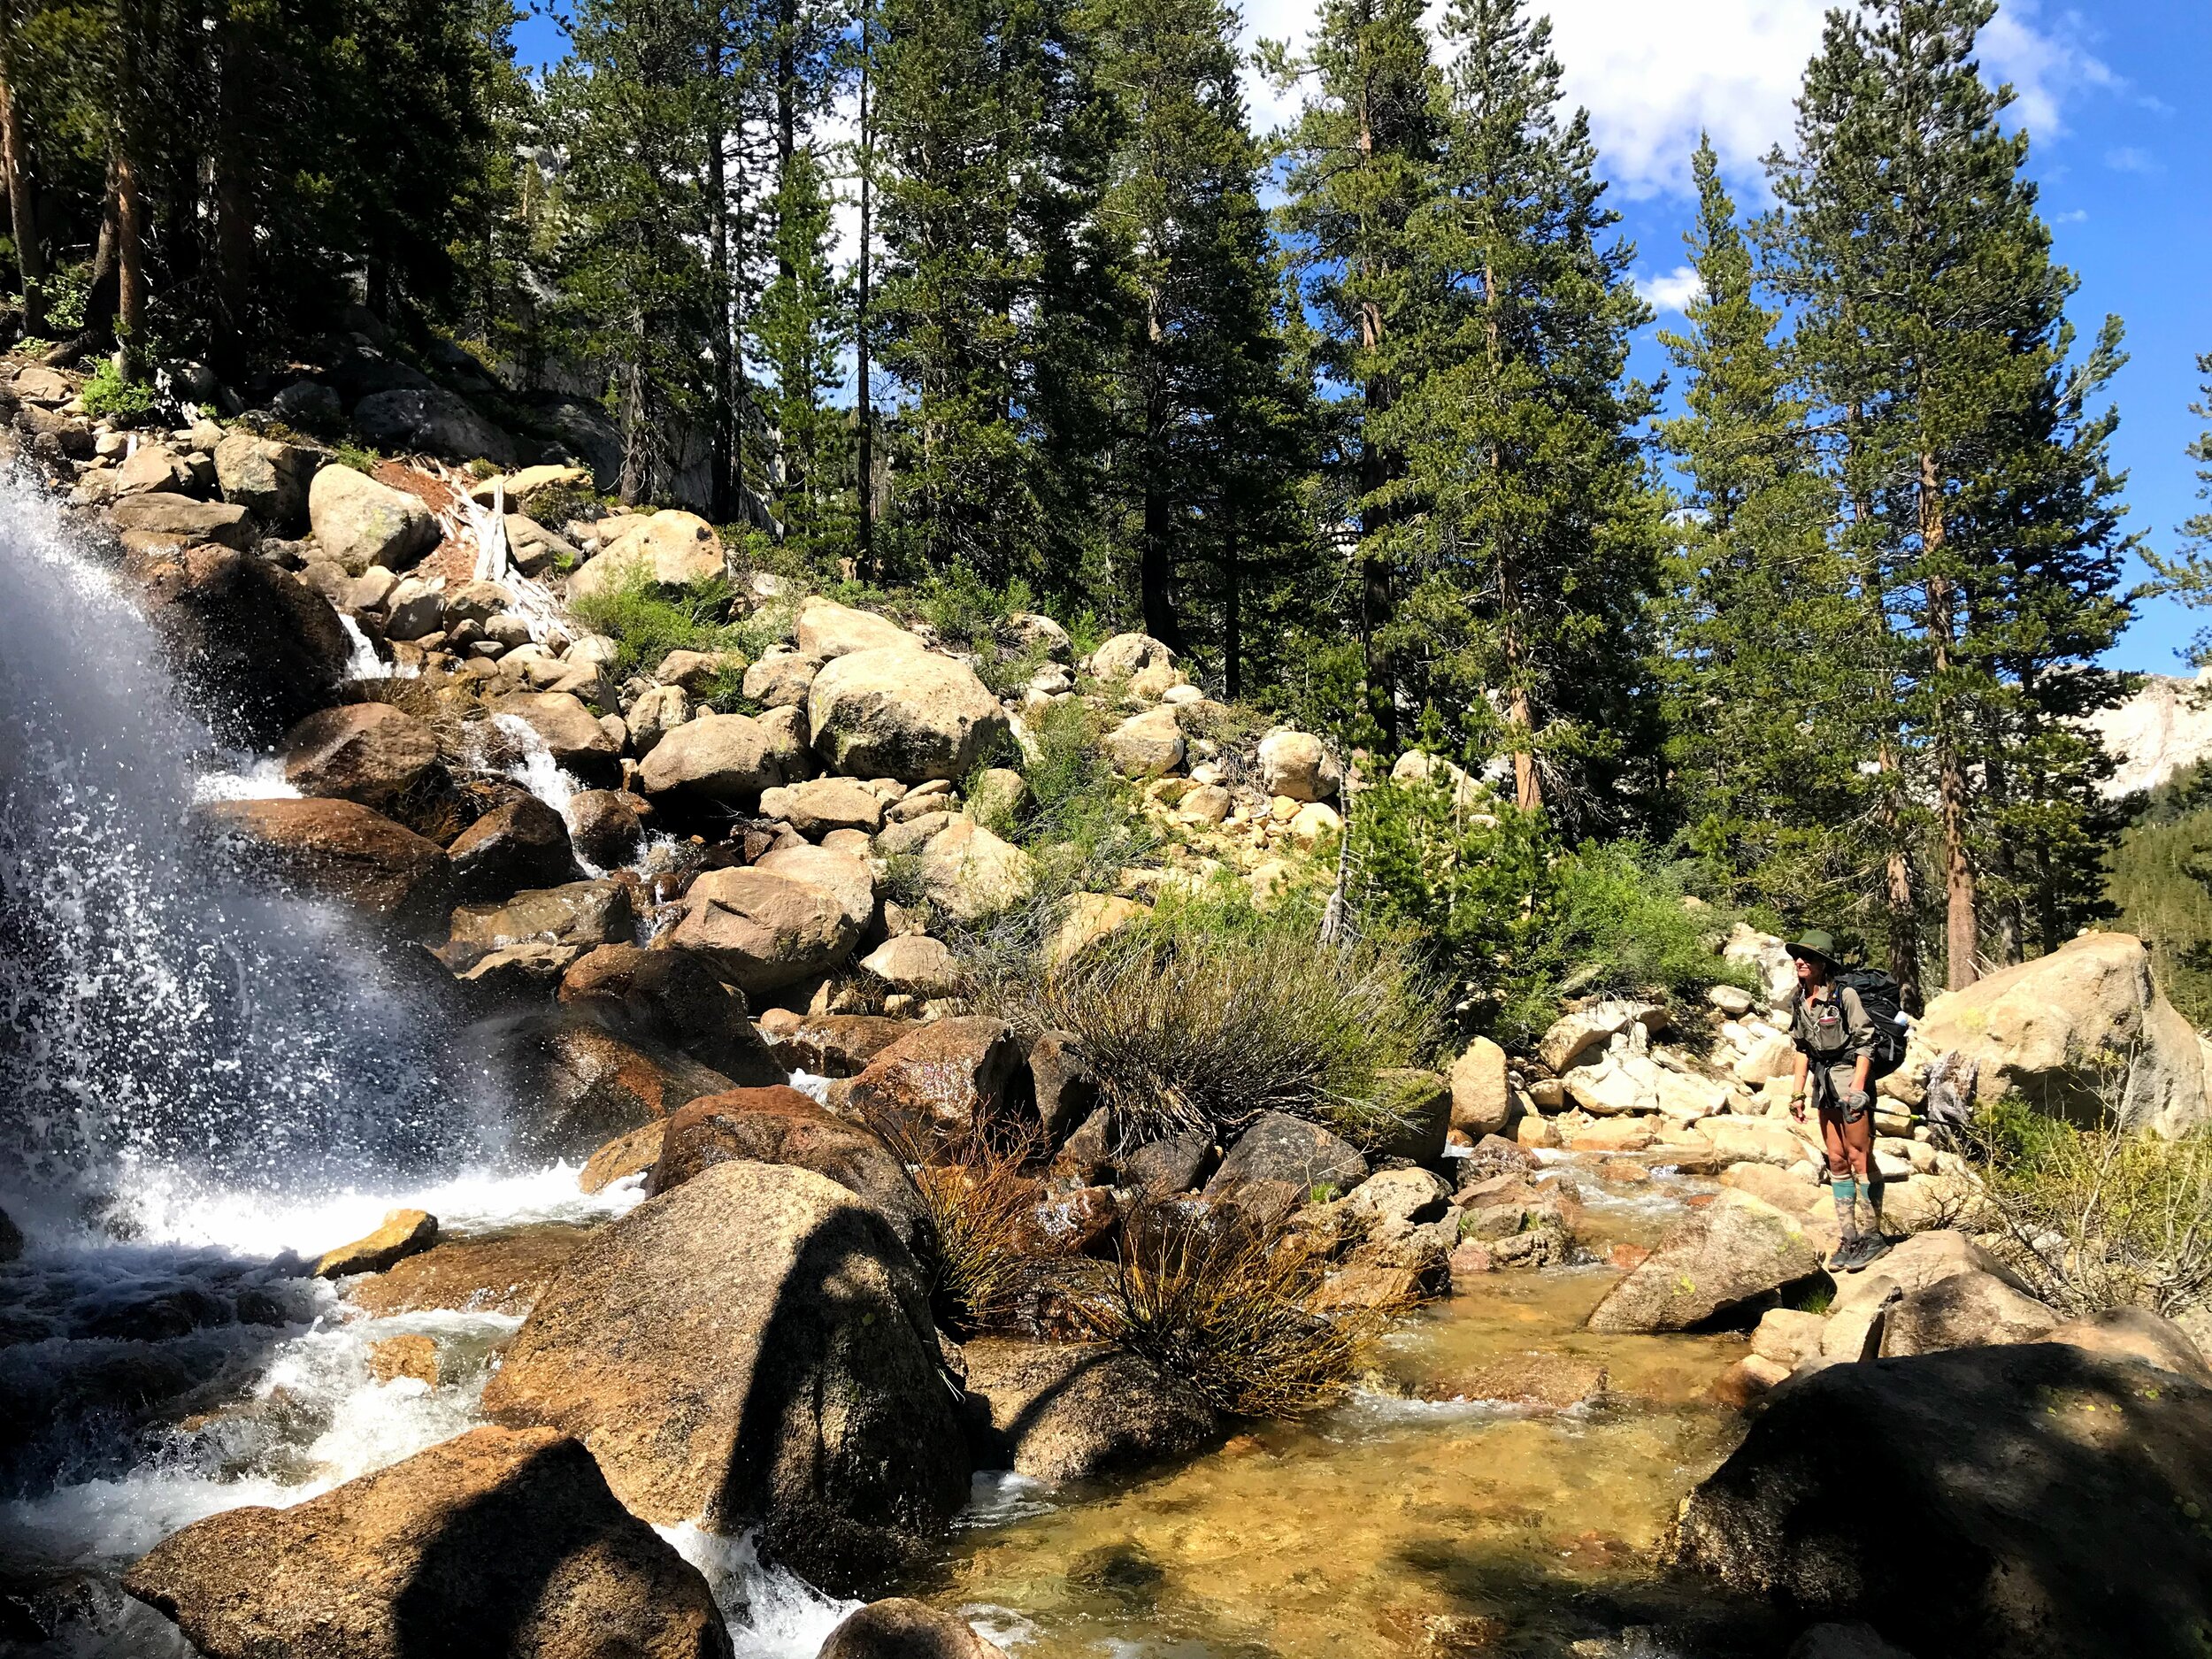 Larry at Silver Pass Creek